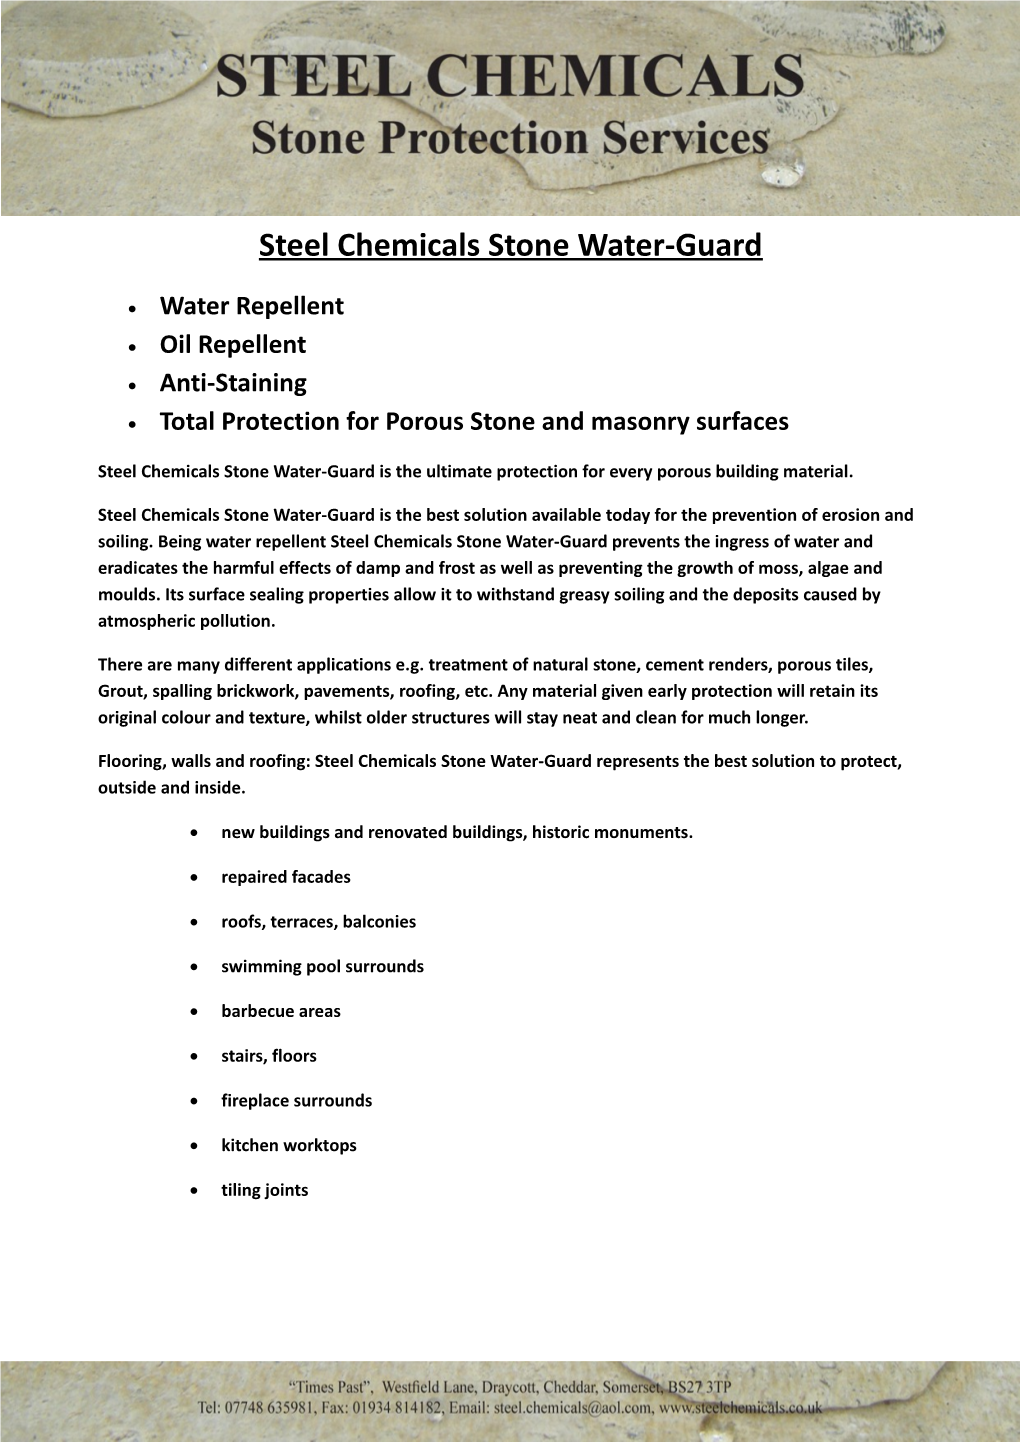 Total Protection for Porous Stone and Masonry Surfaces